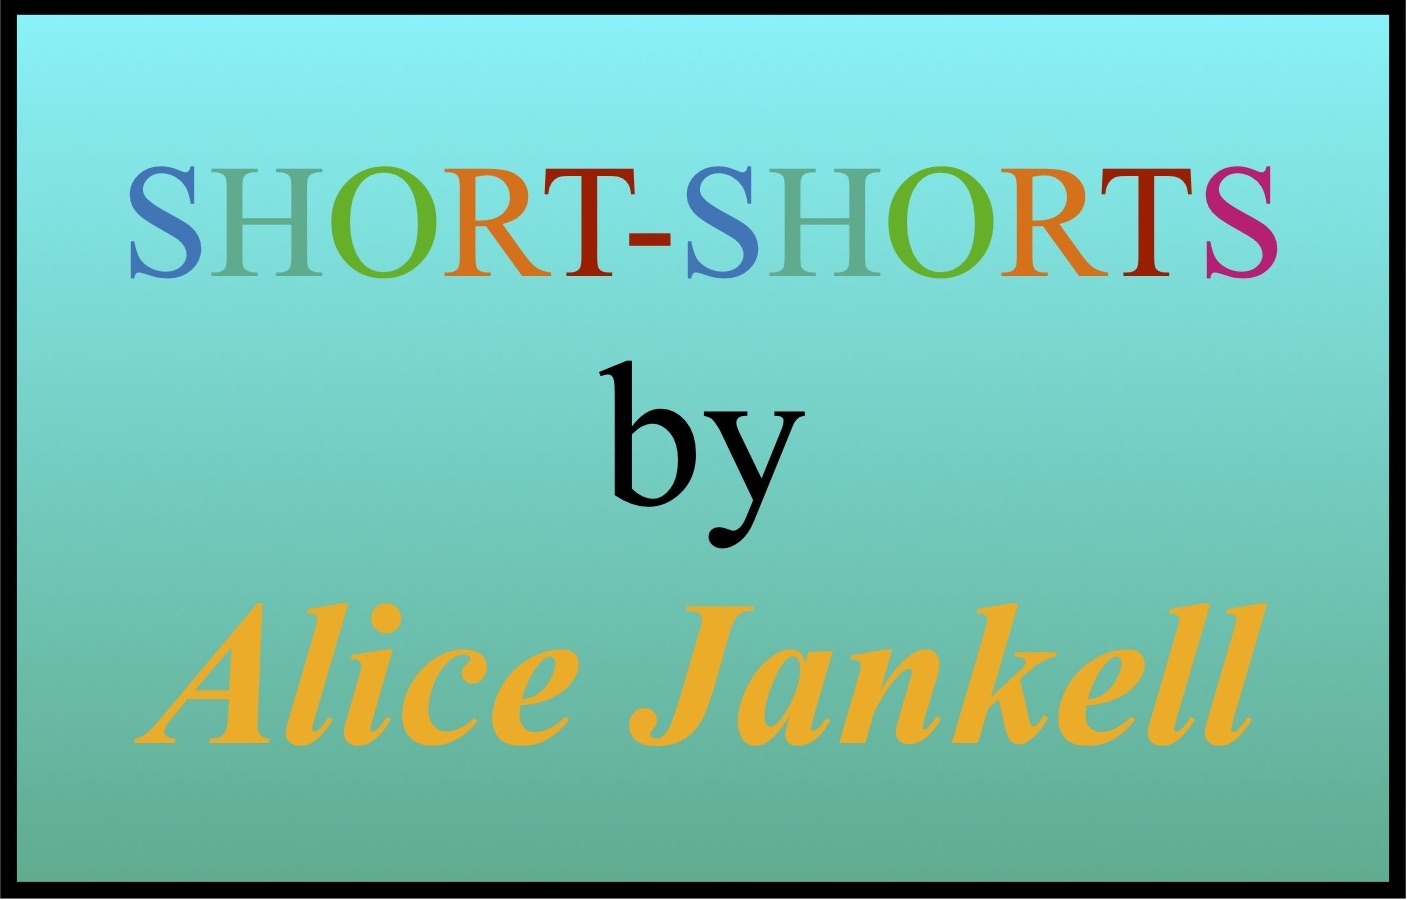 Short-Shorts by Alice Jankell